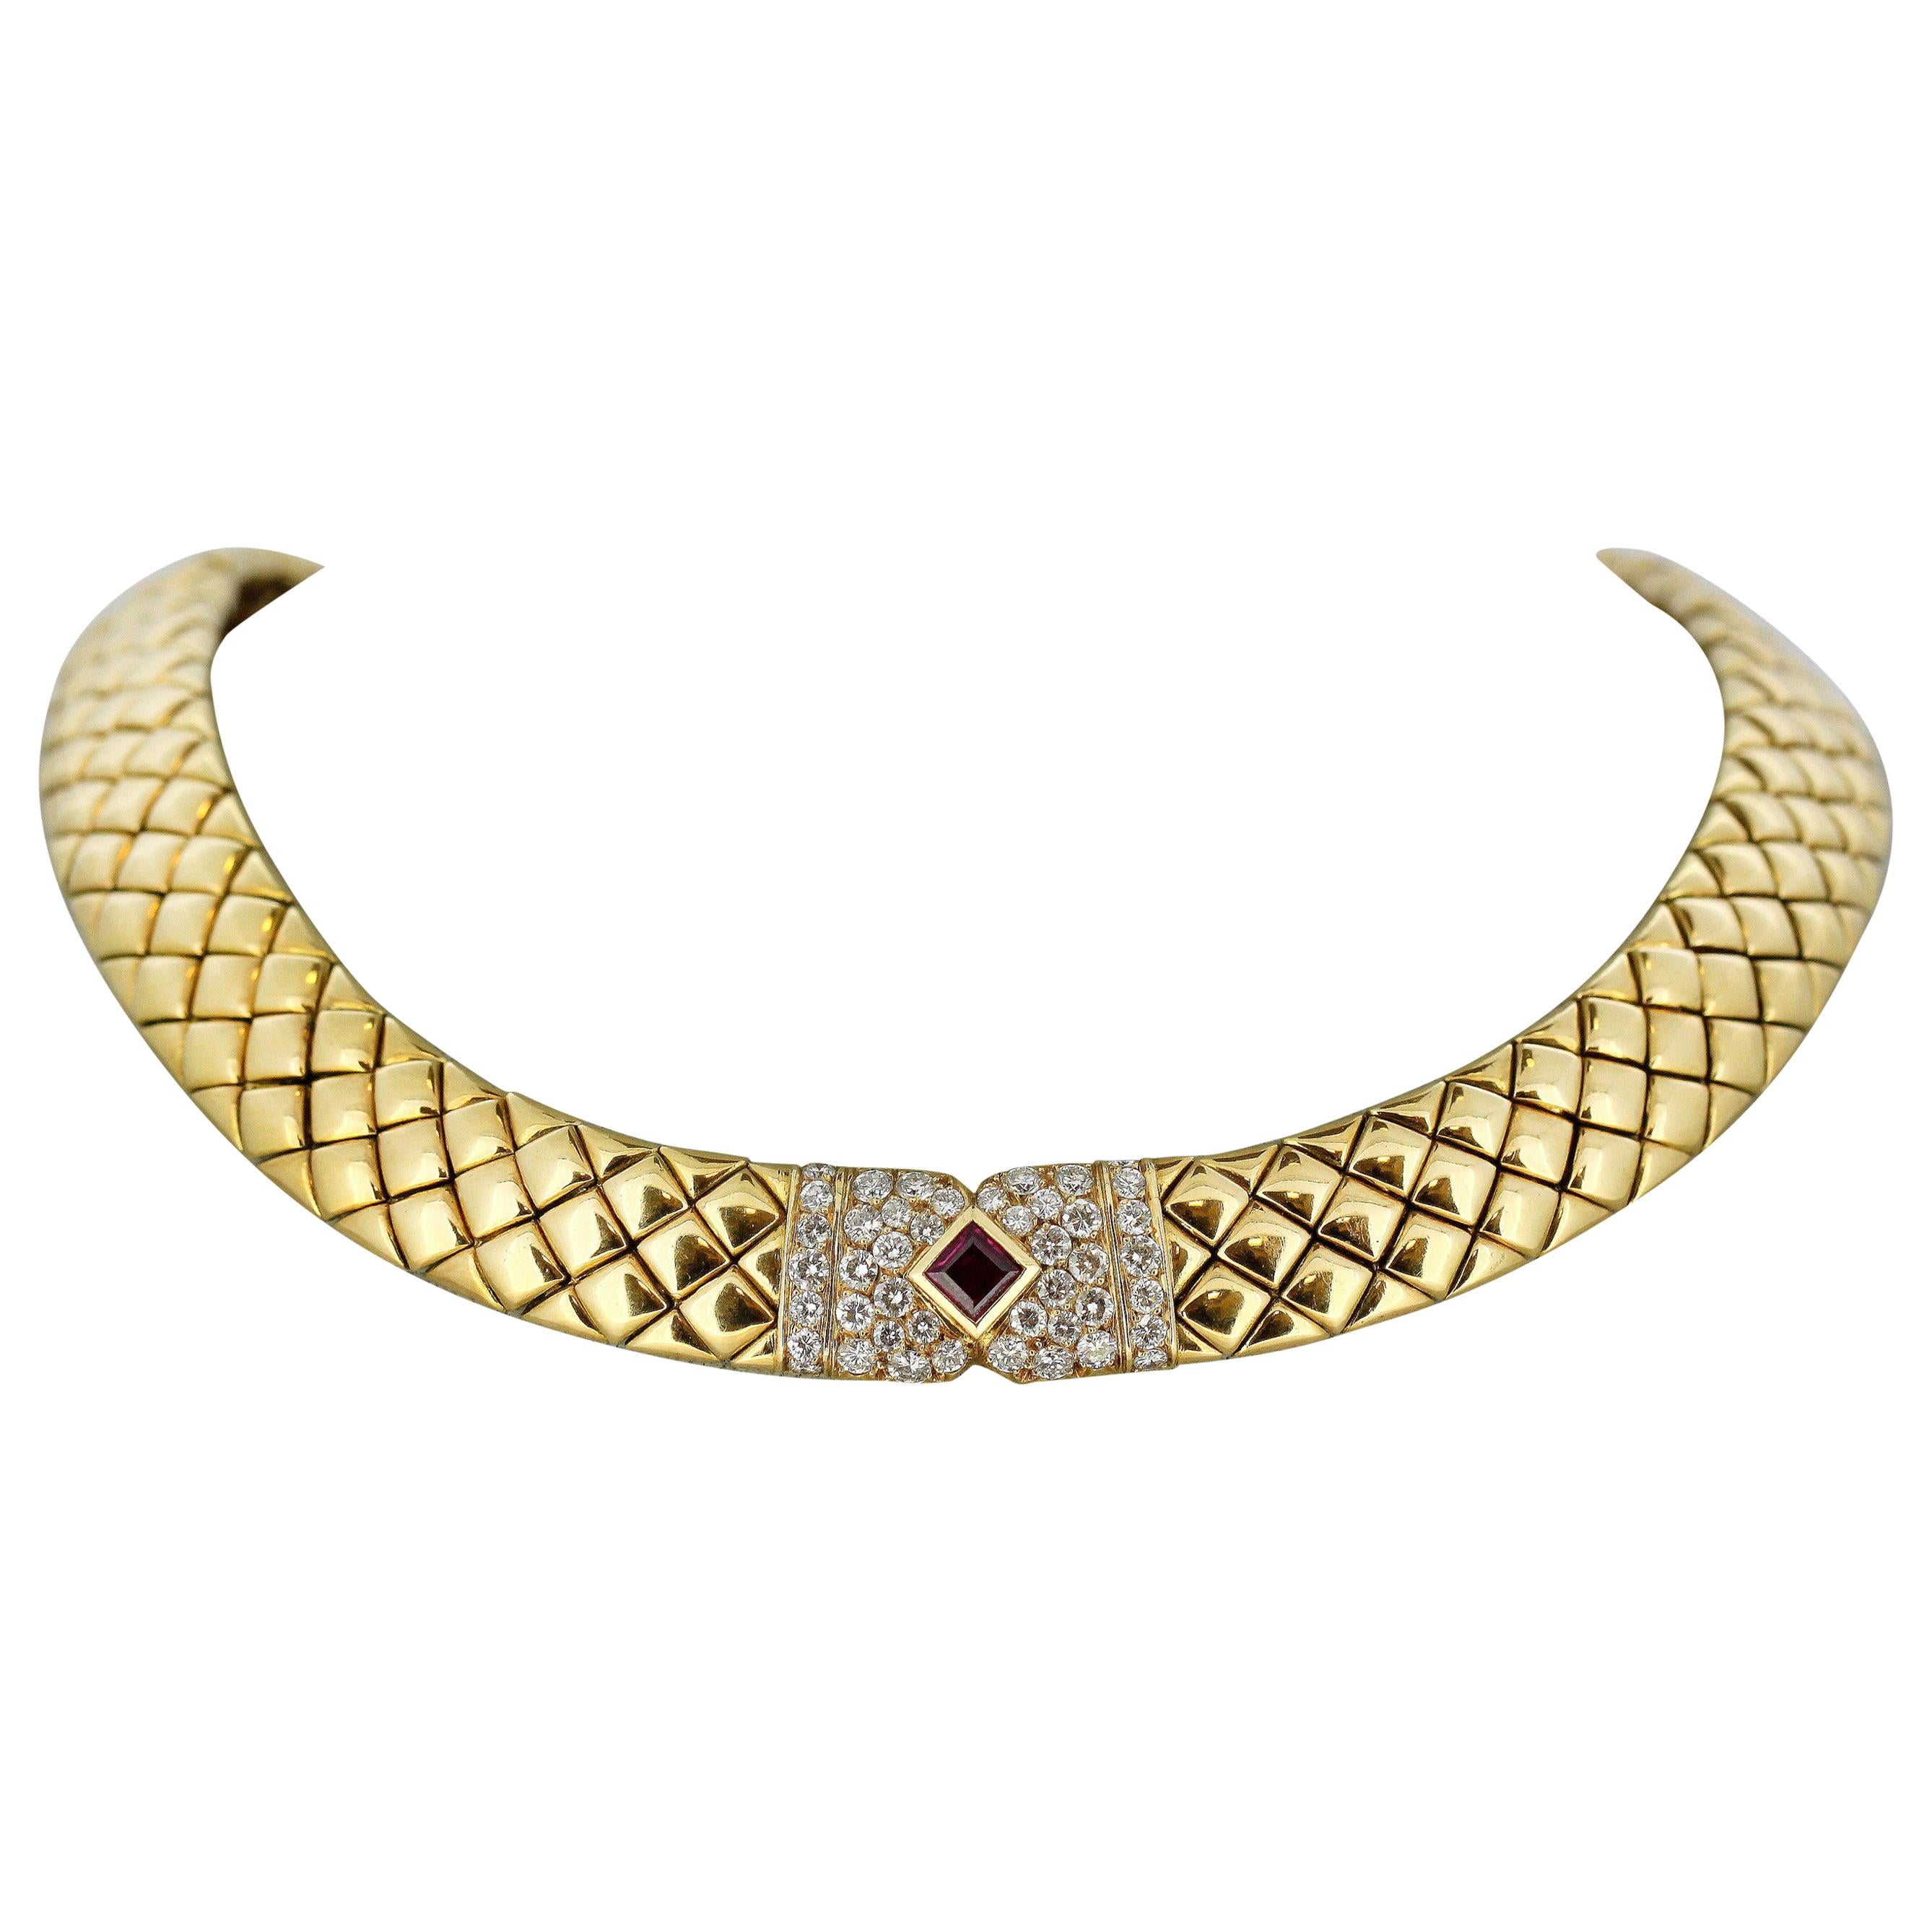 Van Cleef & Arpels, 18 Karat Gold Choker Necklace with Ruby and Diamonds, France